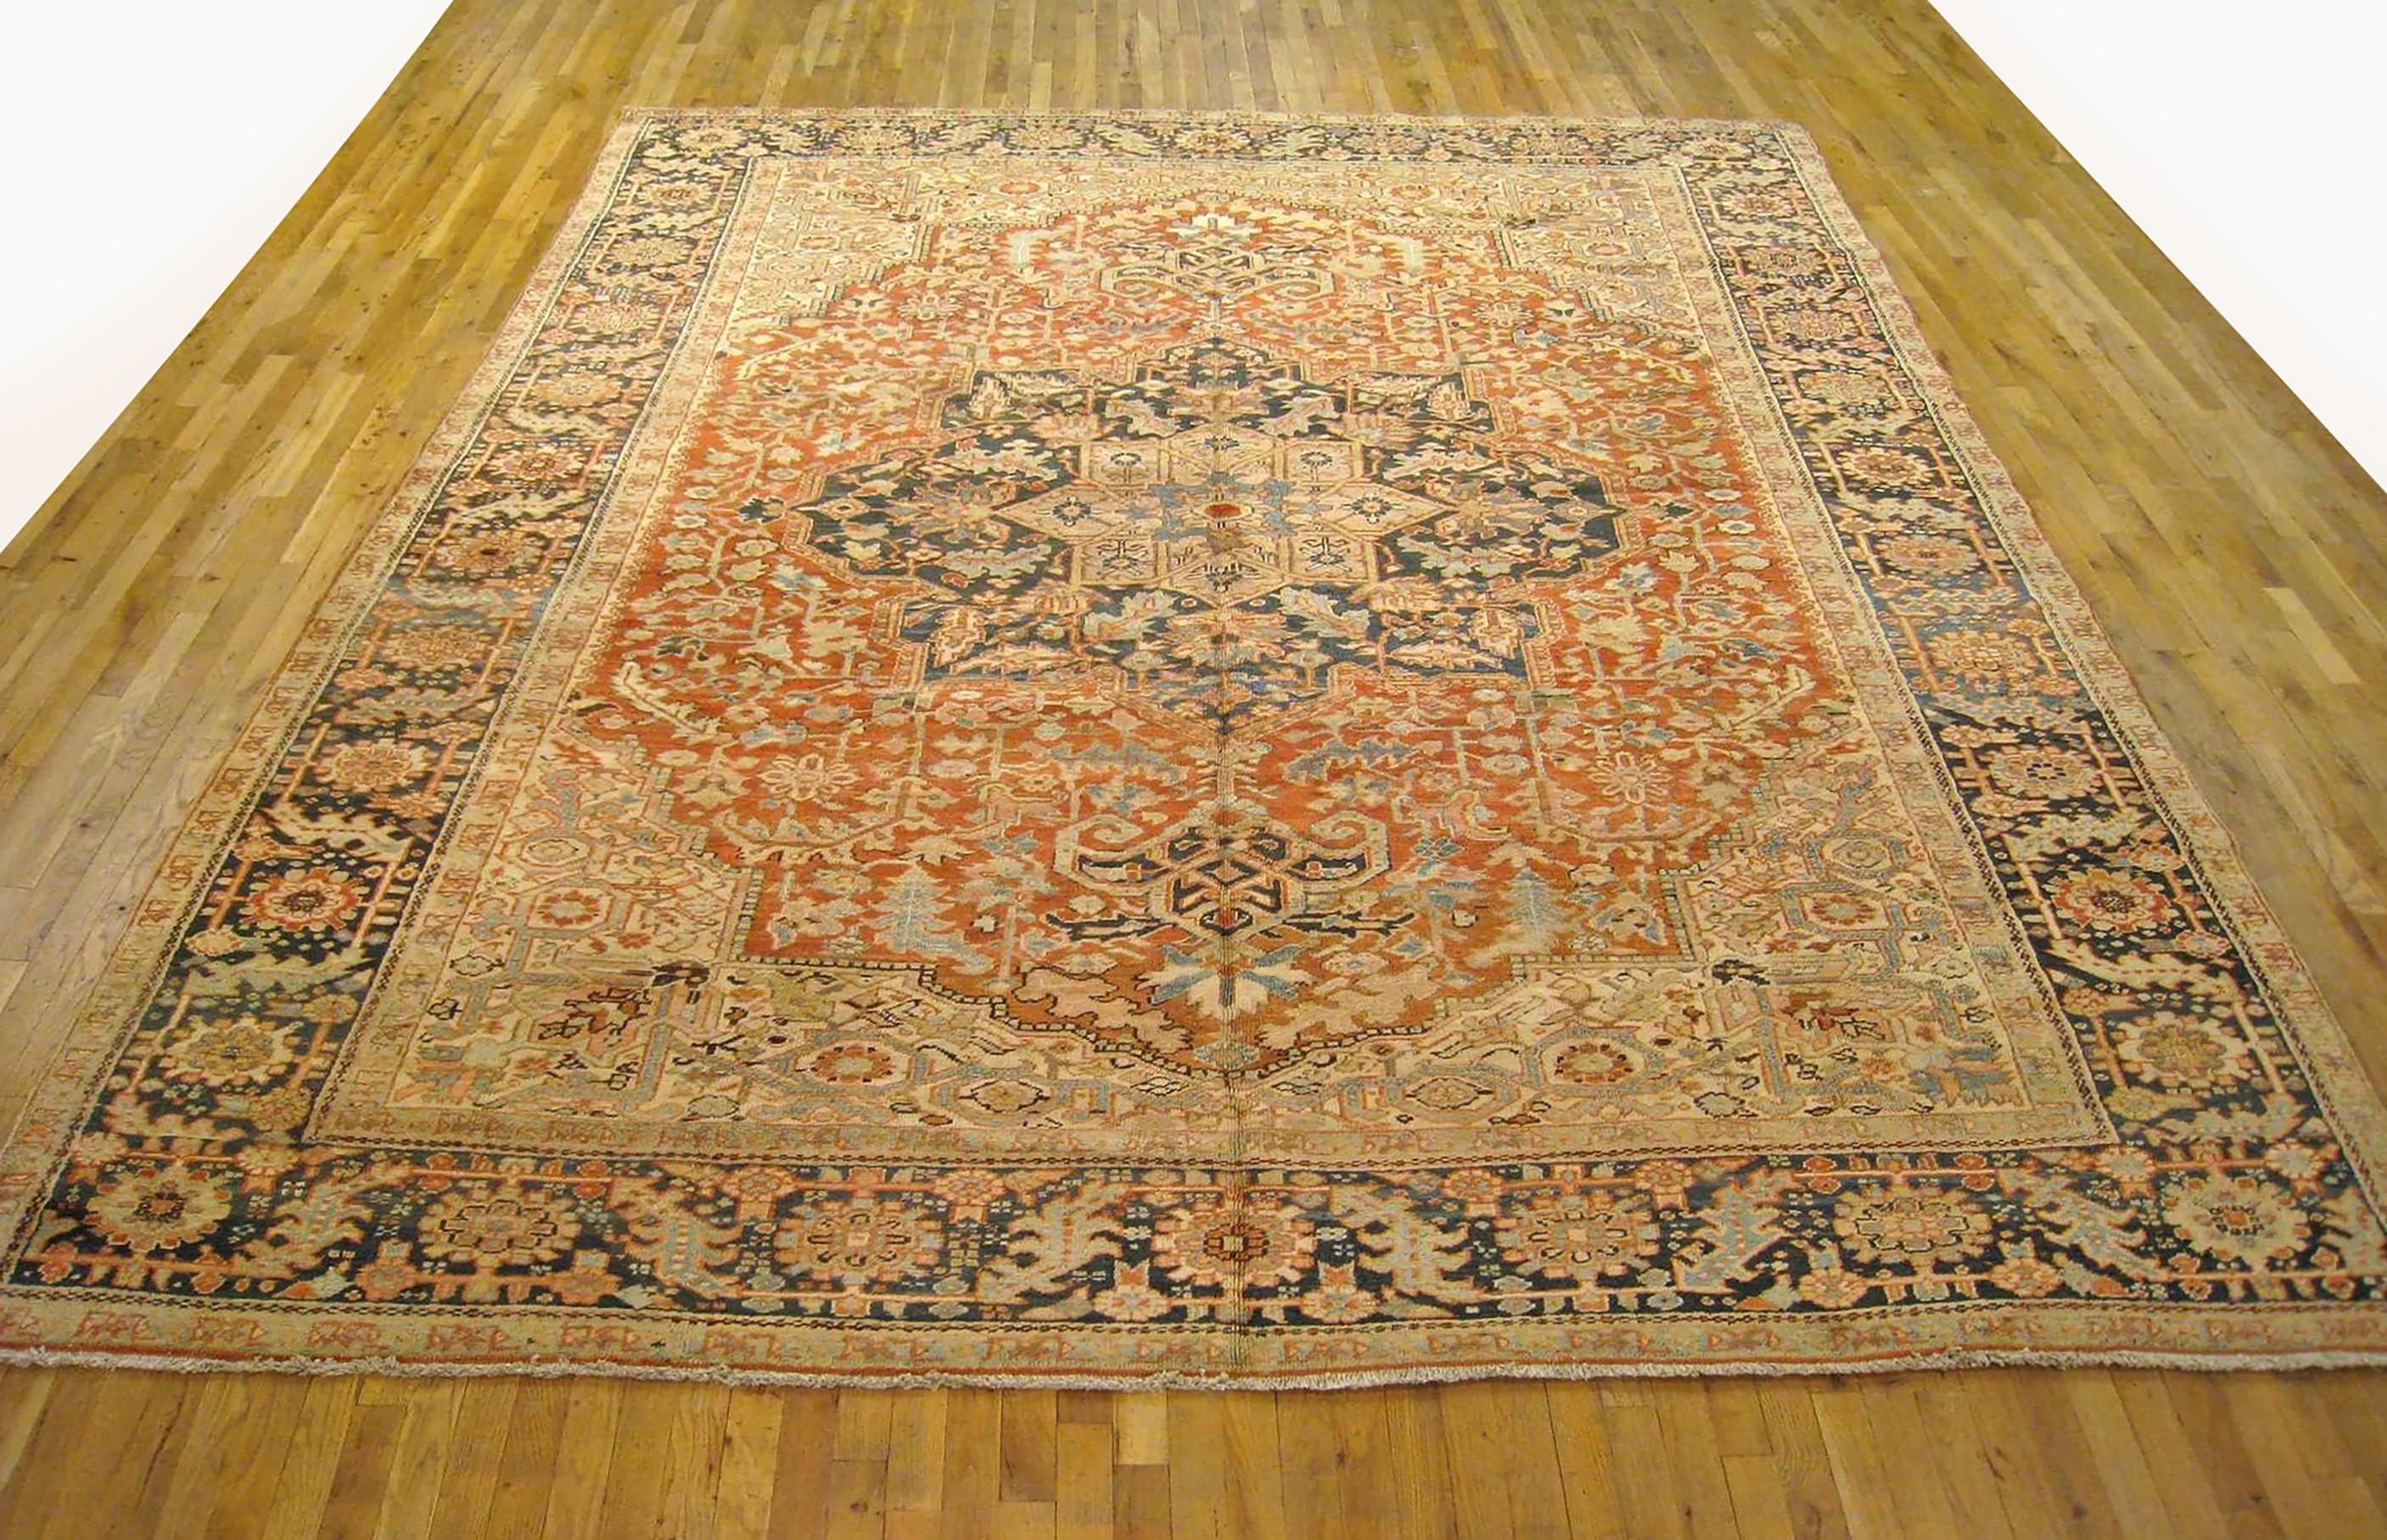 A vintage Persian Heriz oriental carpet, size 12'6 x 9'7, circa 1930. This handsome hand-woven geometric rug features a soft red primary field, with a blue central medallion and softly hued corner spandrels. The central field is enclosed within a